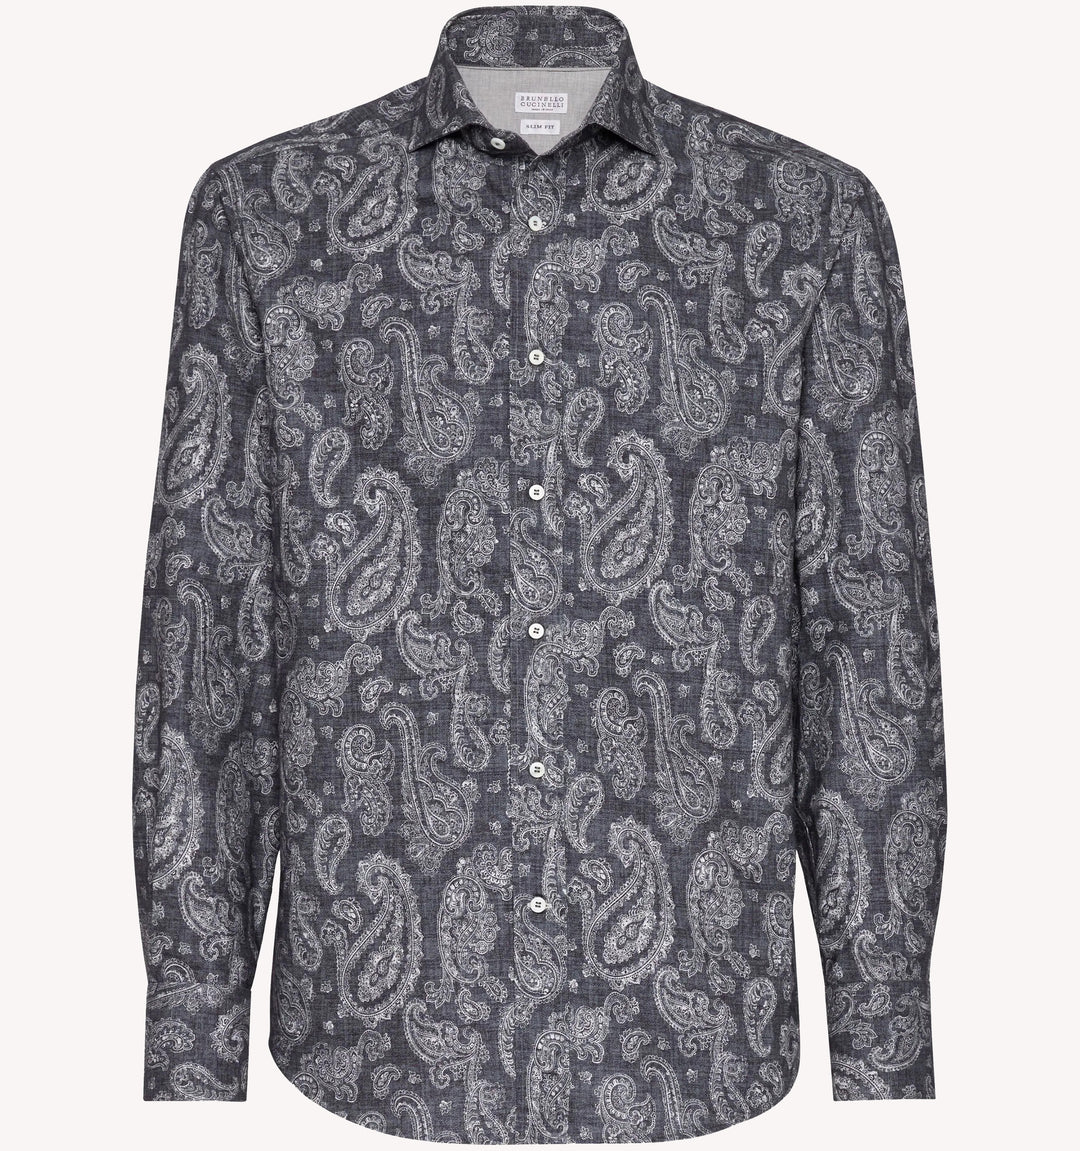 Brunello Cucinelli Paisley Sport Shirt in Charcoal Grey